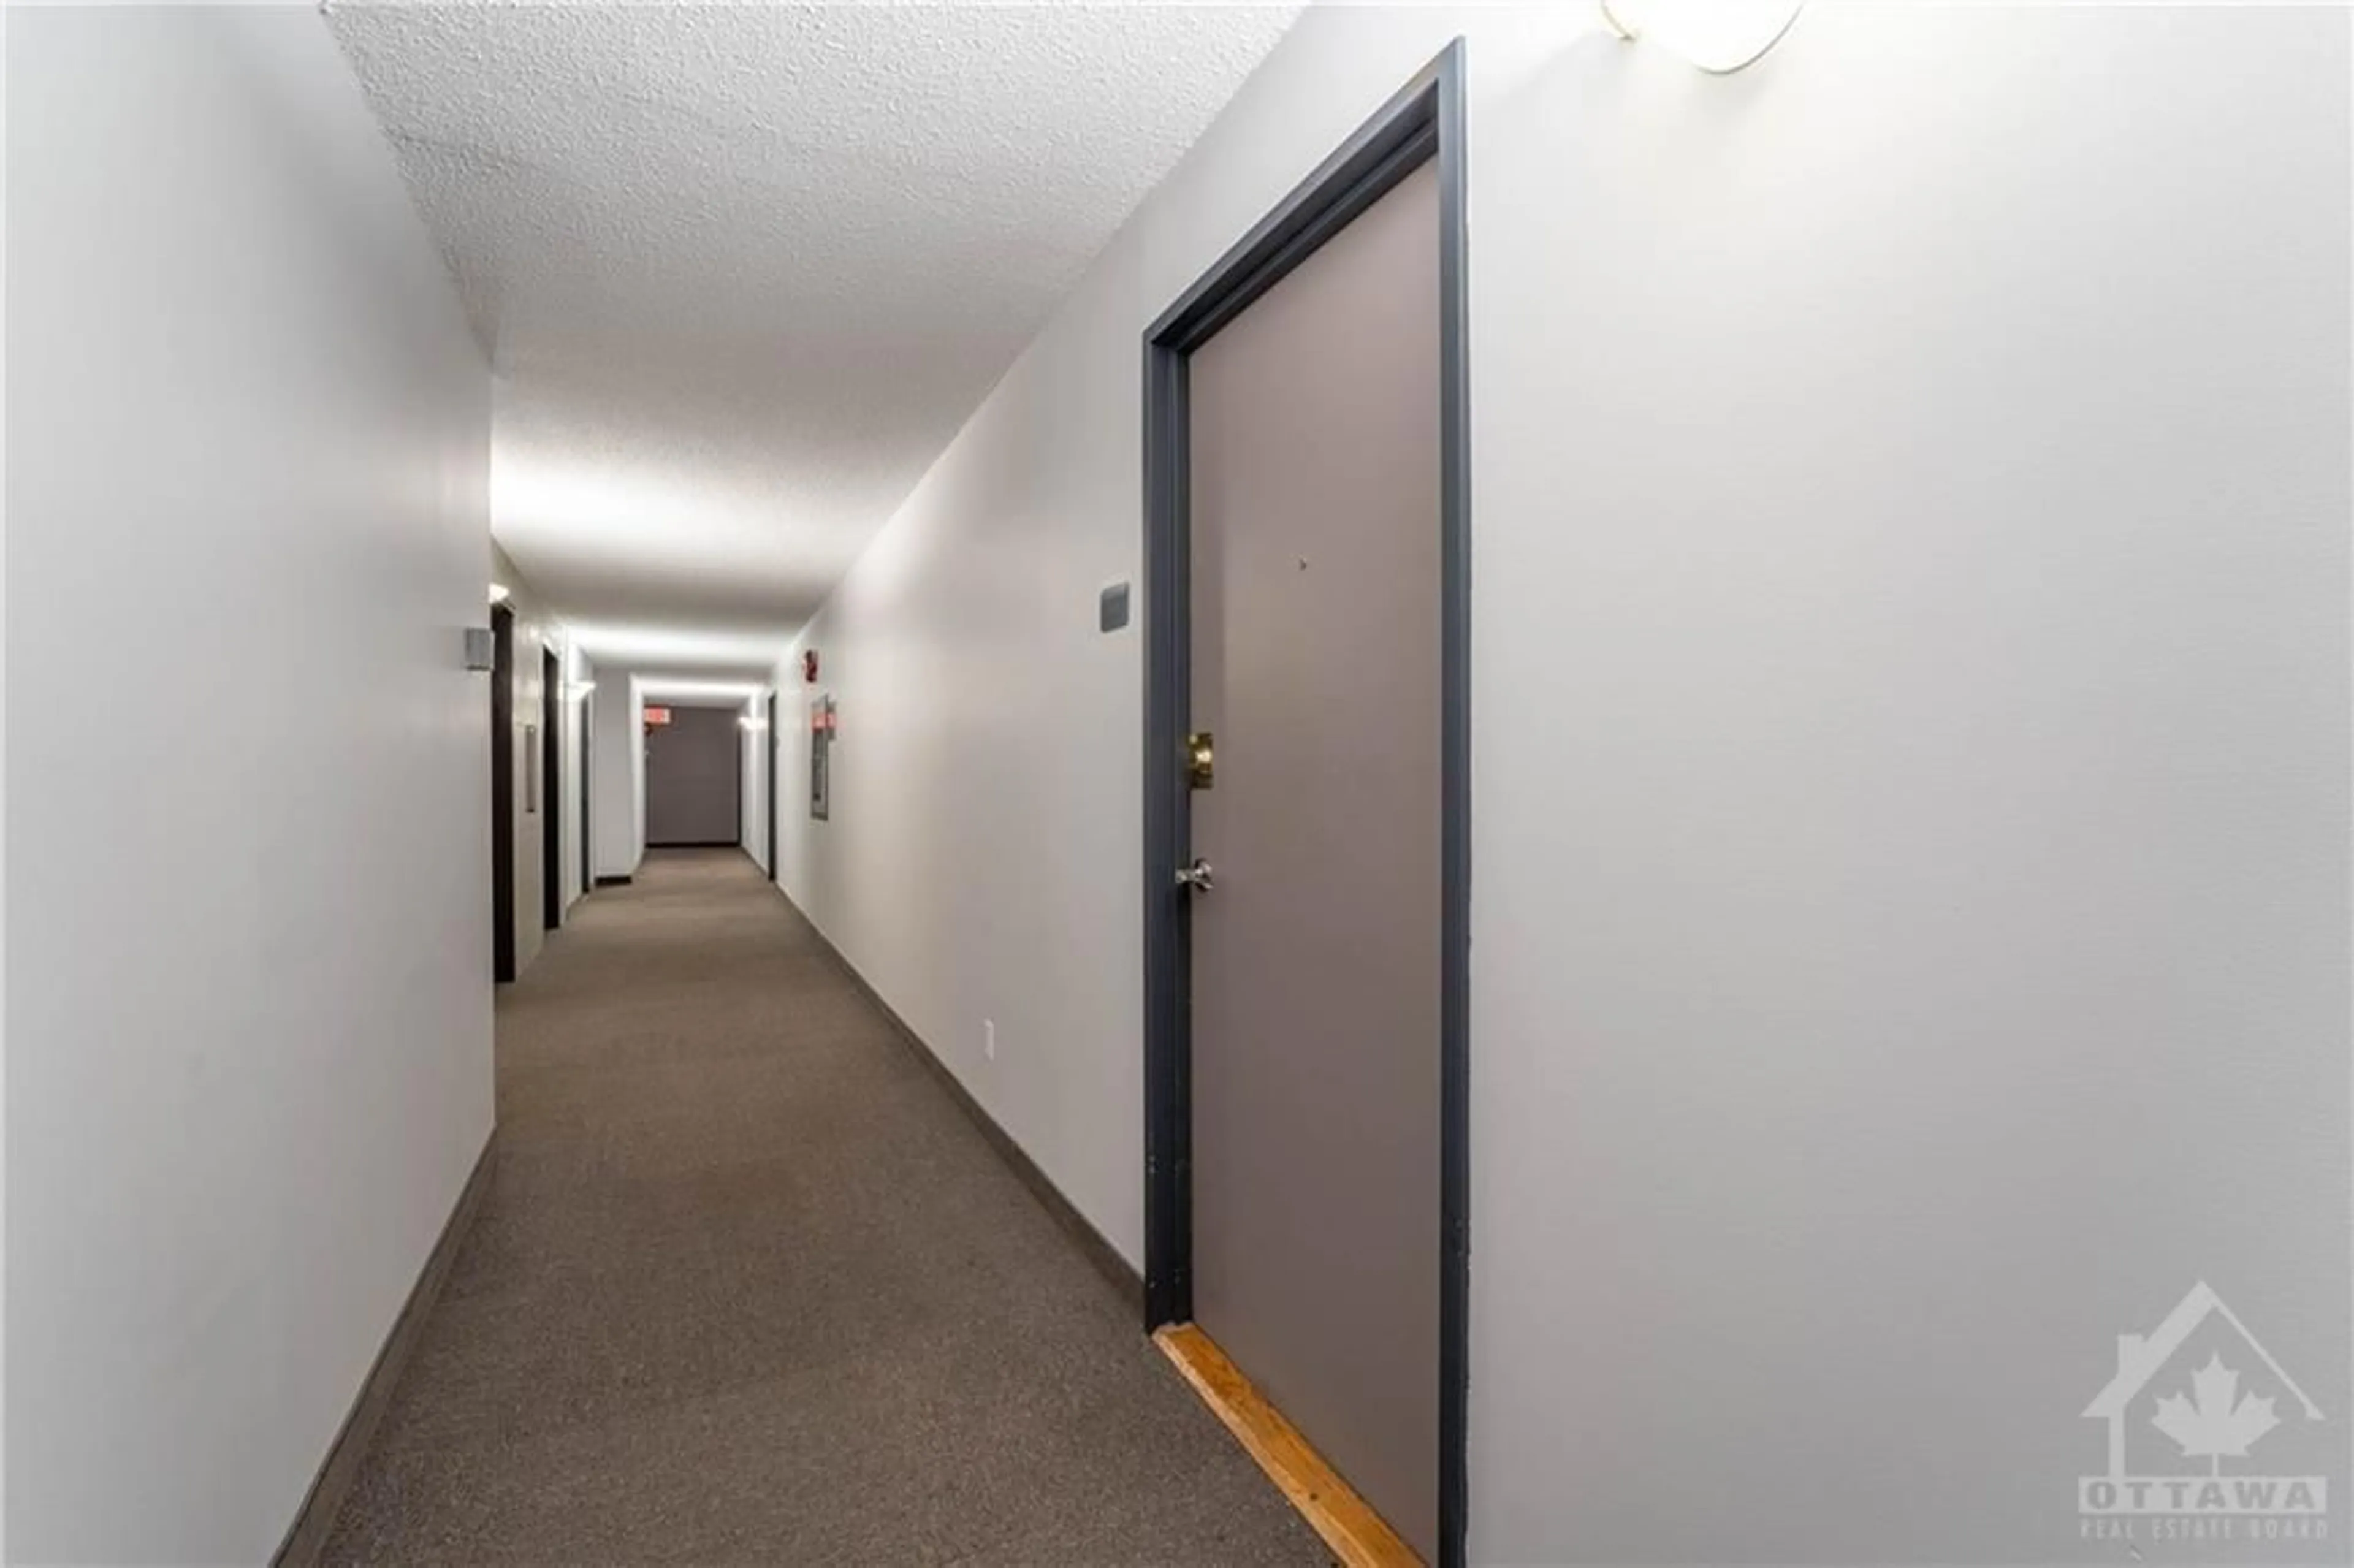 Other indoor space for 158B MCARTHUR Ave #606, Ottawa Ontario K1L 8C9